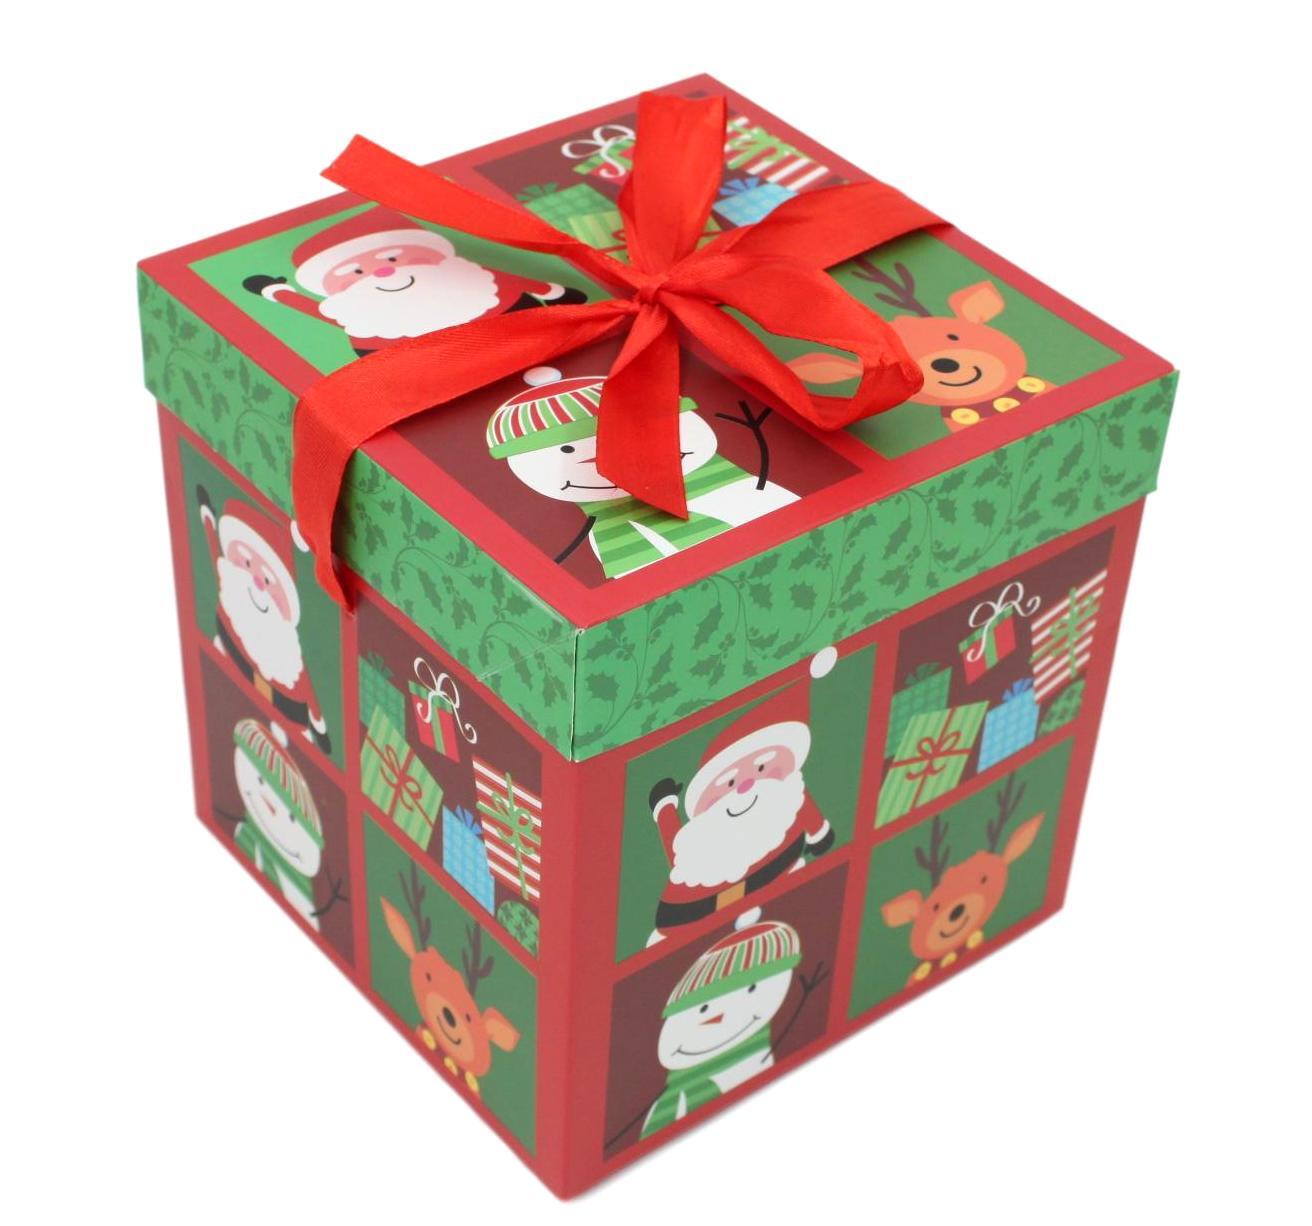 Details about   3pcs Premium Large Christmas Eve Gift Box With Lid & Ribbon Festive Xmas Boxes